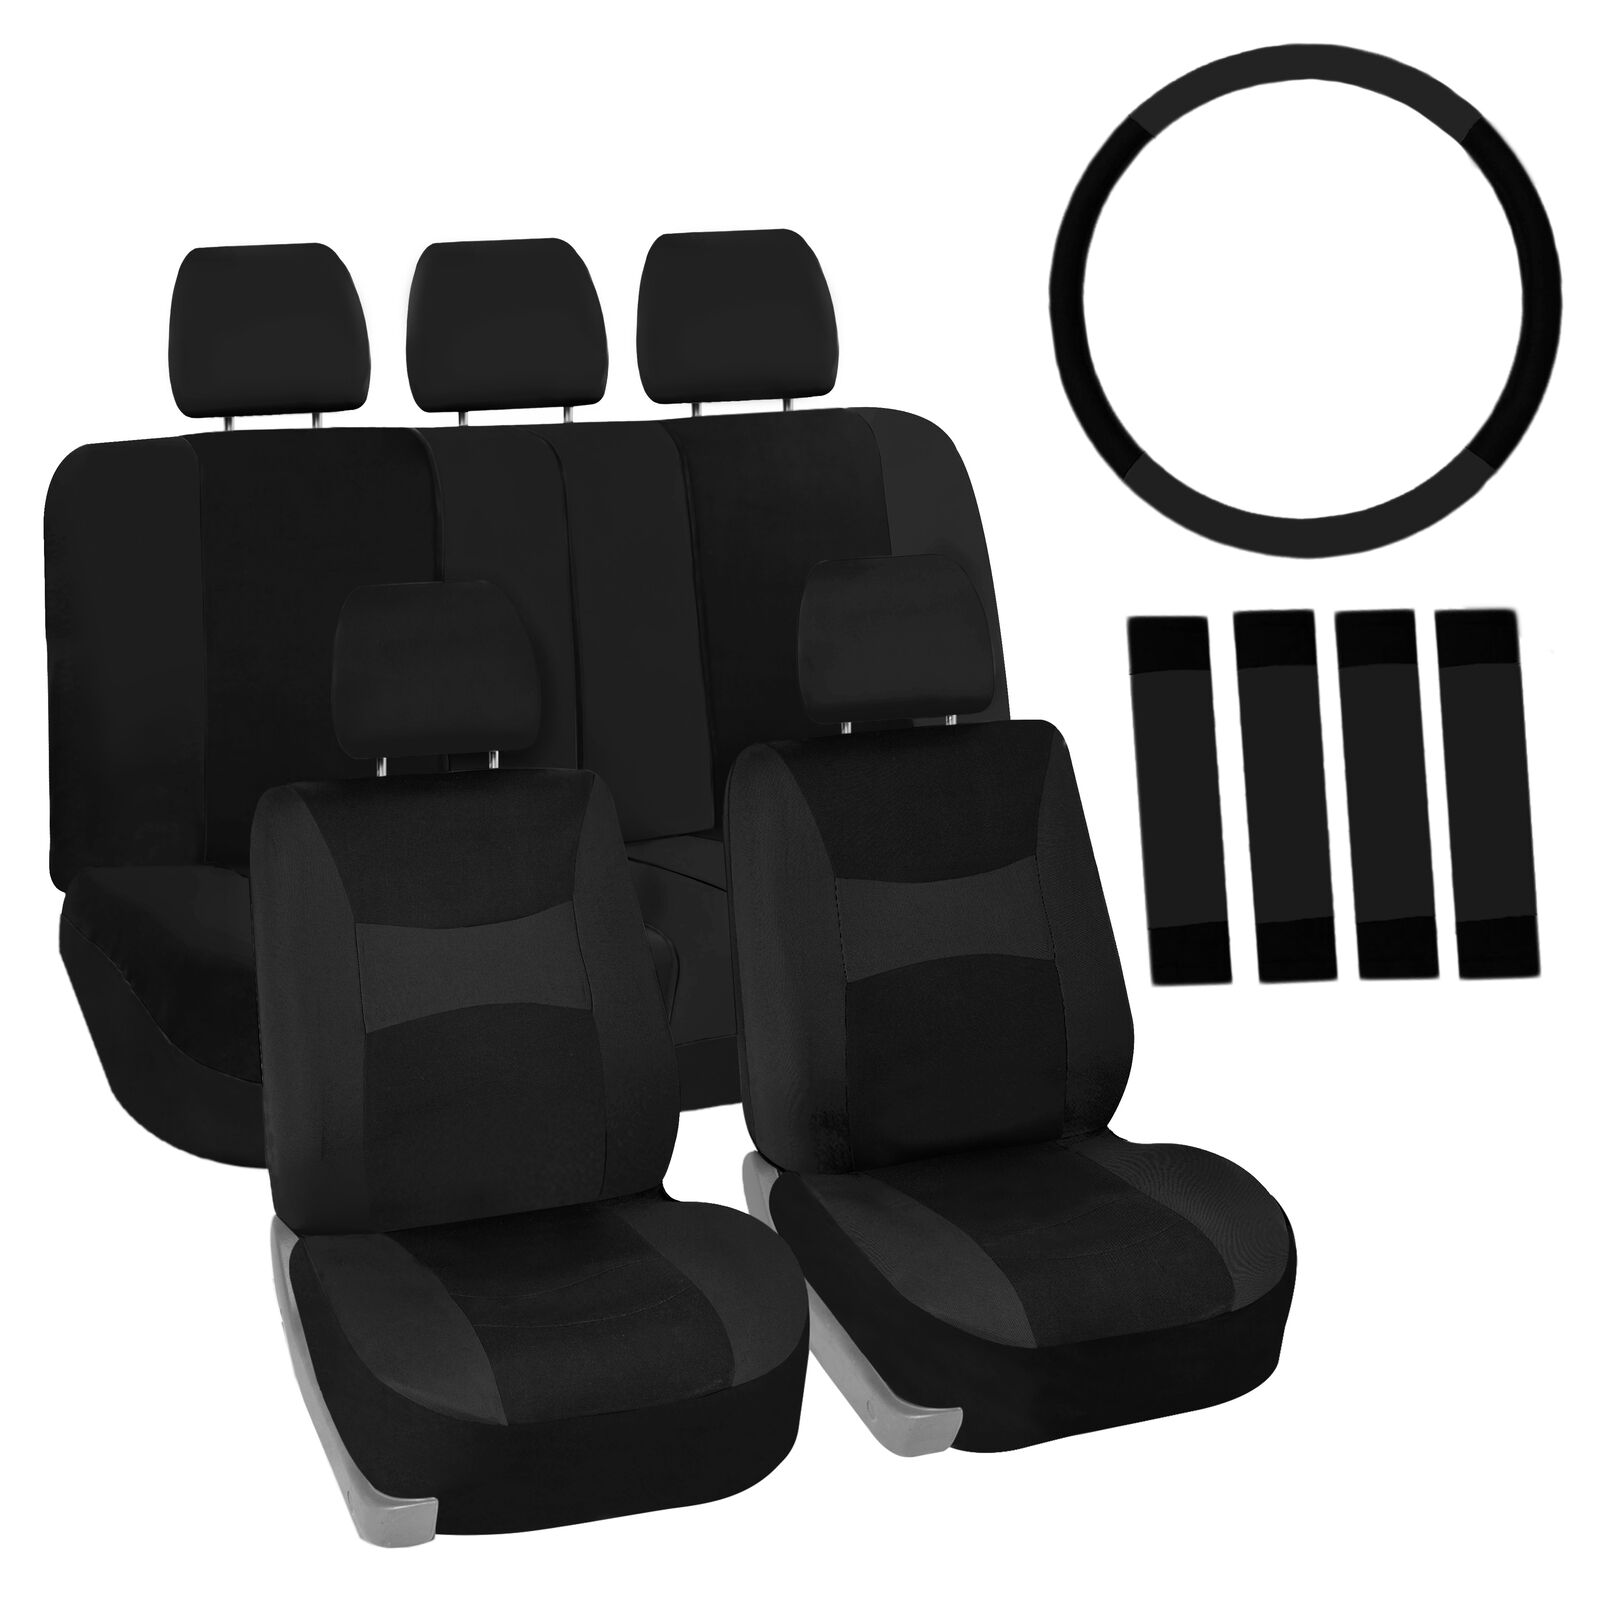 FH Group Car Seat Covers for Auto Steering Wheel Belt & 5 Head Rest - Full Set